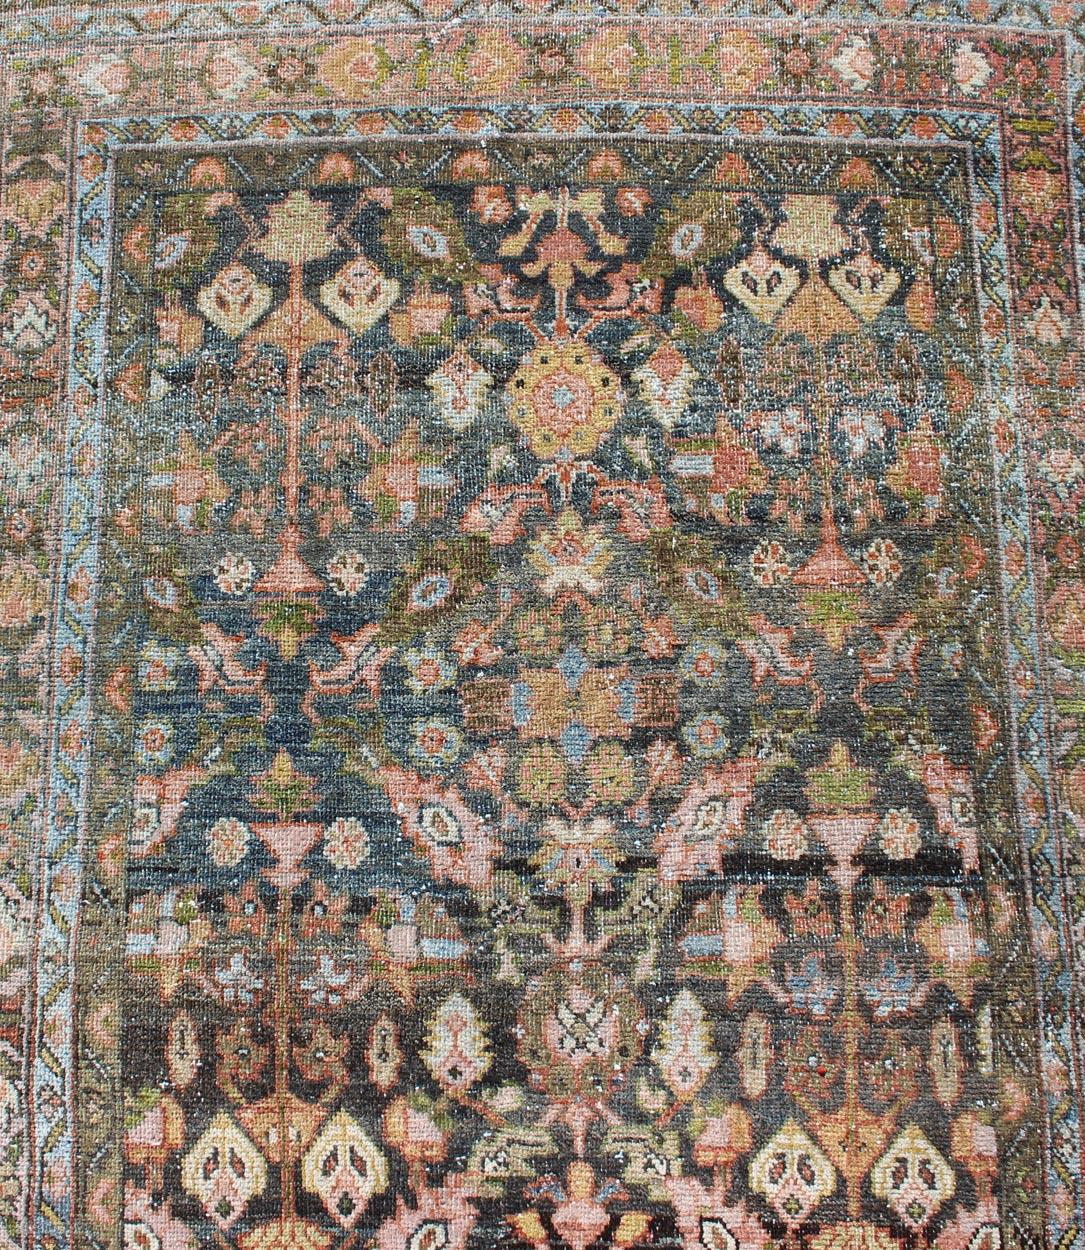 Wool Colorful Antique Persian Hamedan Runner with All-Over Floral Design